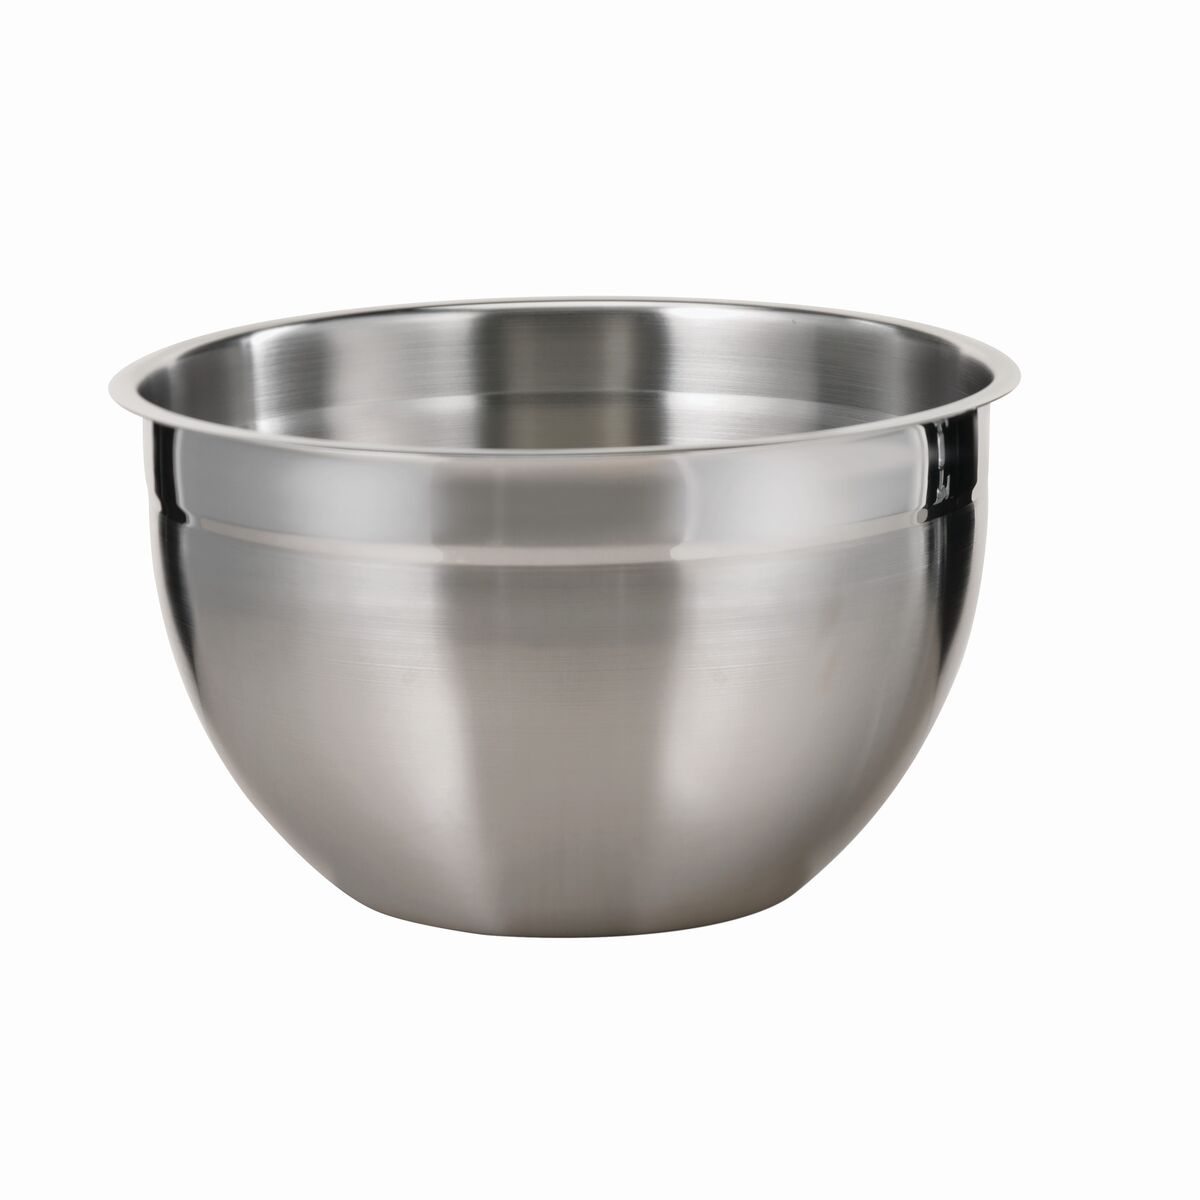  Crestware 13-Quart Stainless Steel Mixing Bowl, Silver